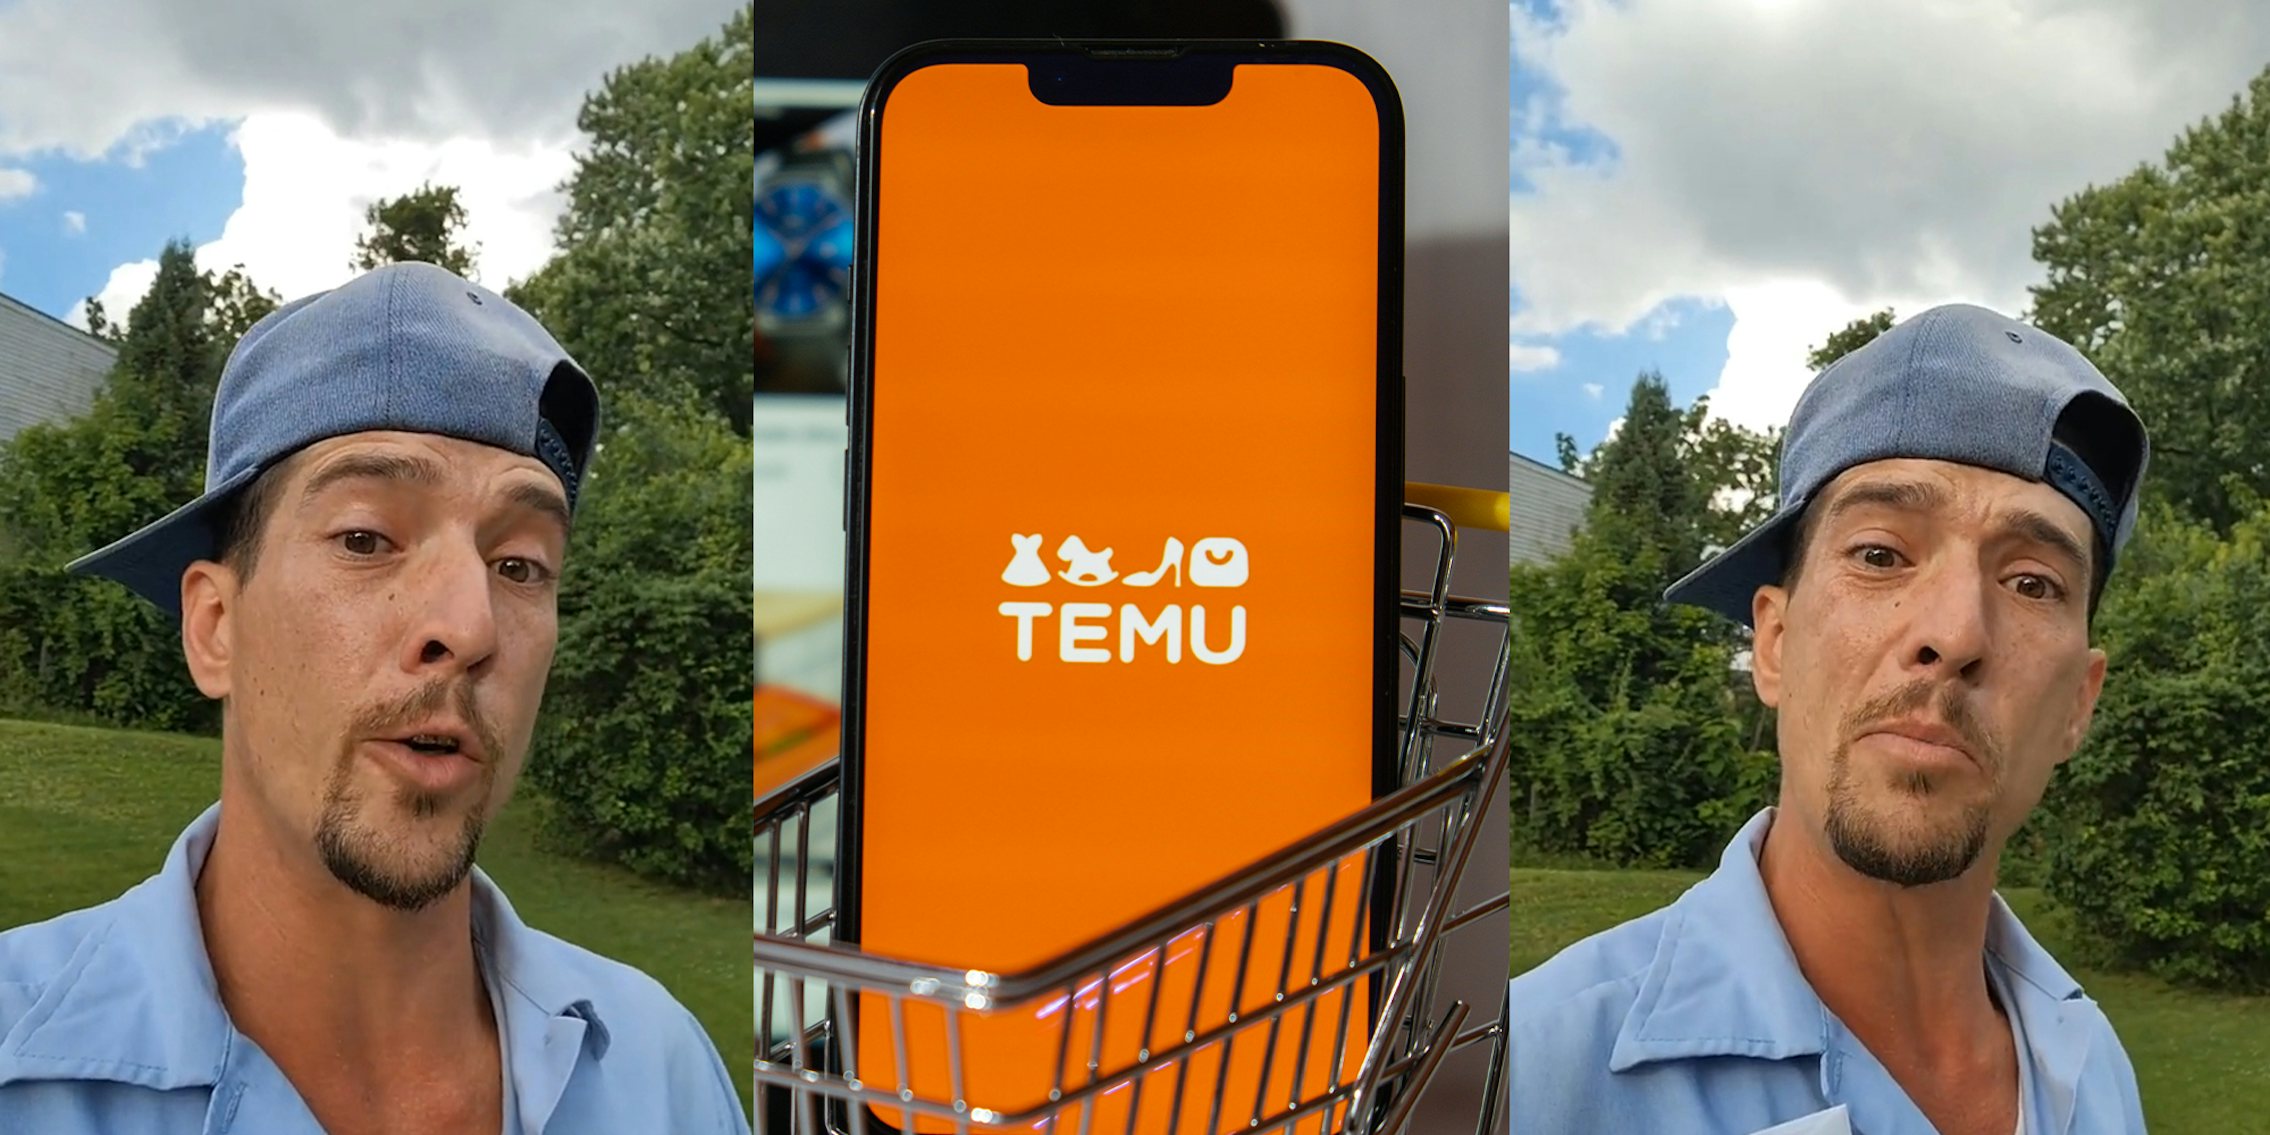 Mailman urges customers to stop ordering from Temu